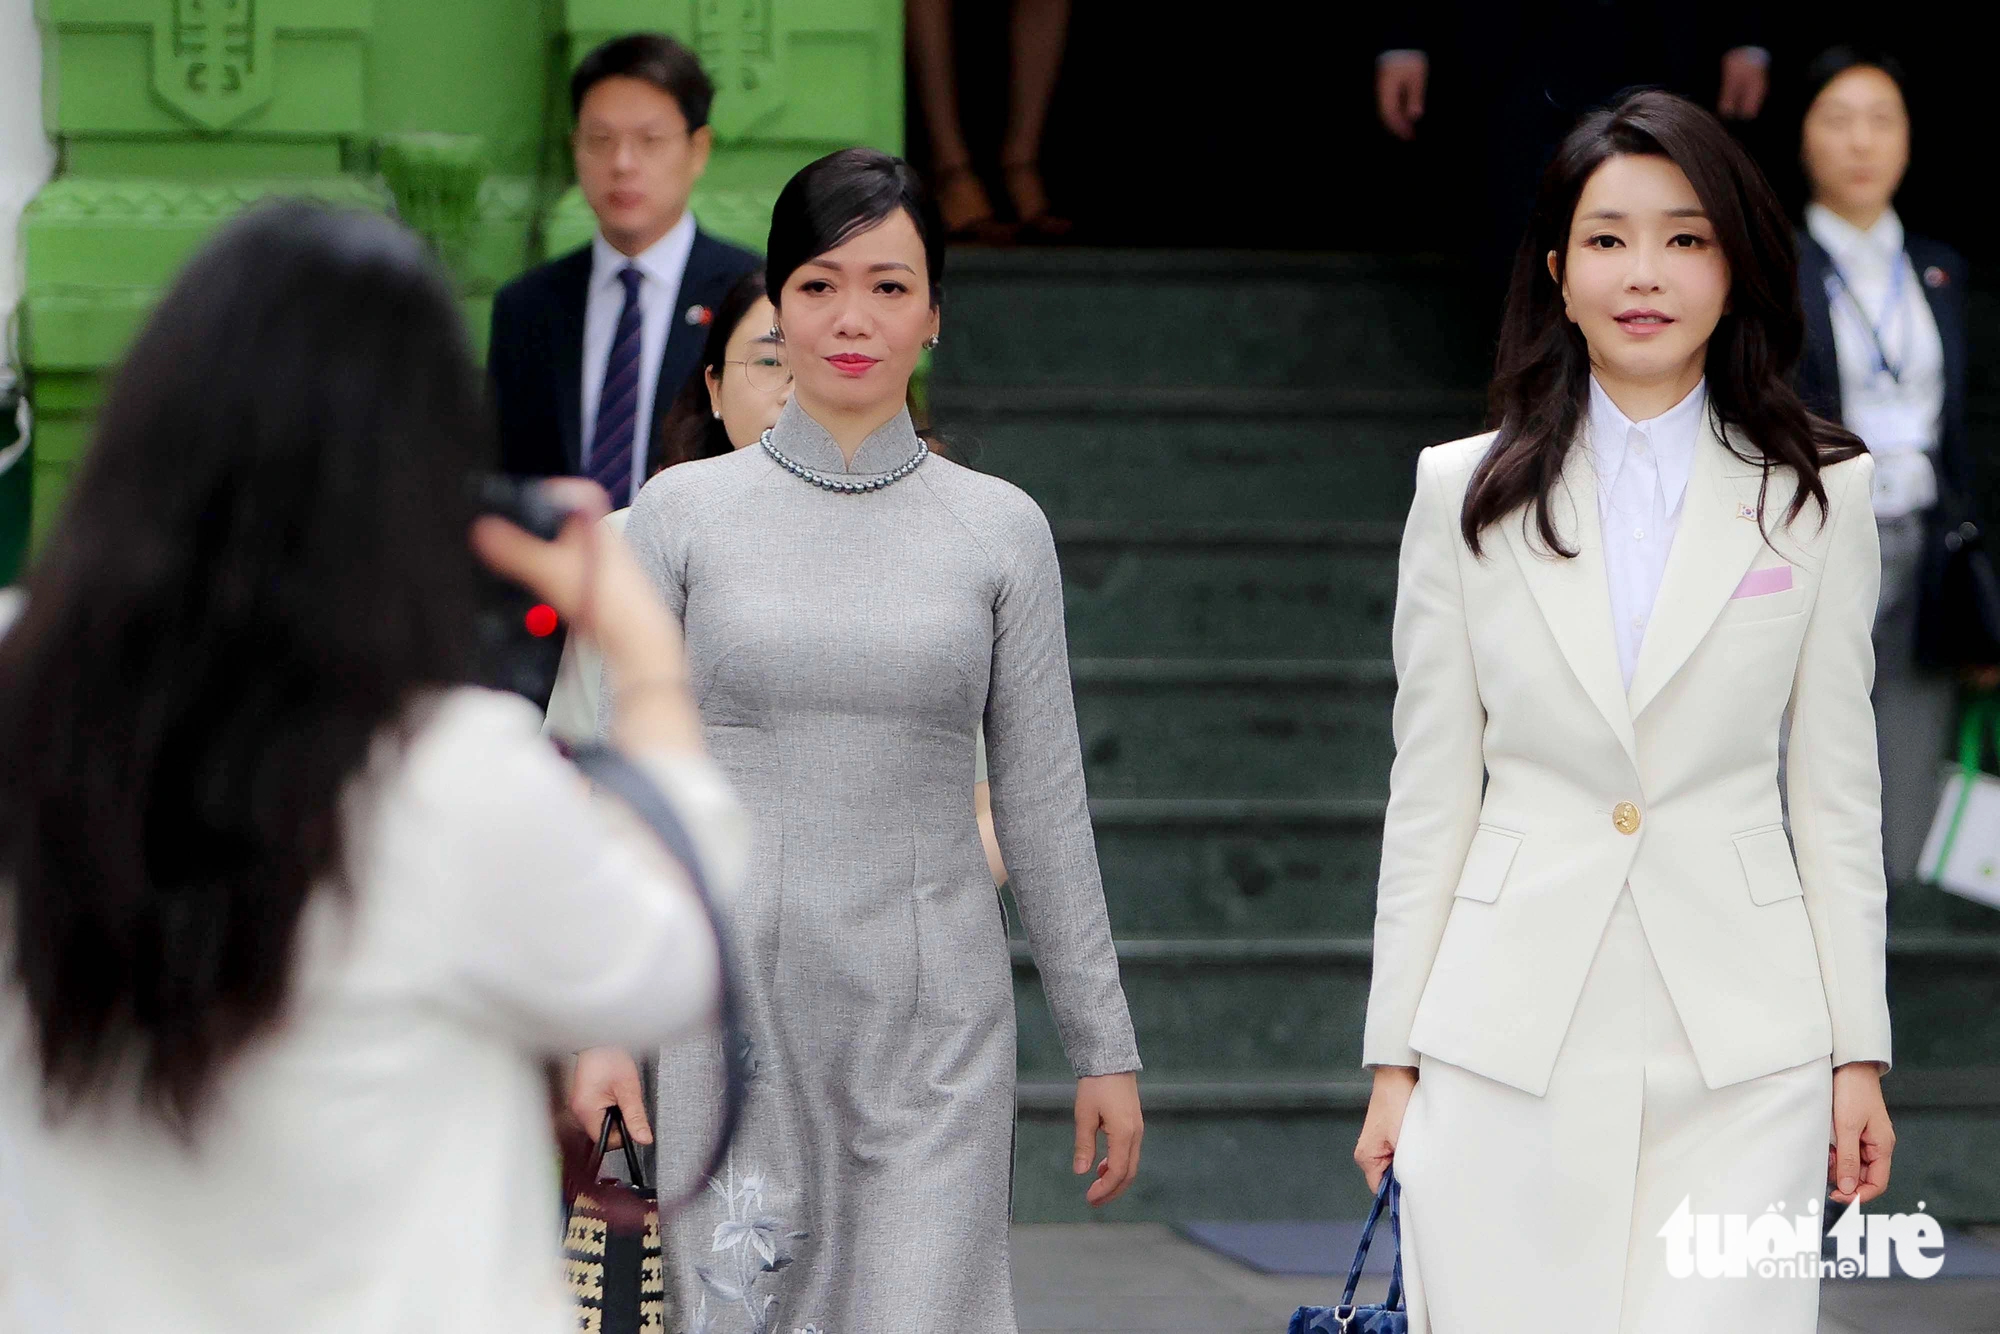 First Lady of Vietnam Phan Thi Thanh Tam (L) and her South Korean counterpart Kim Keon Hee (R) move from Luc Thuy Restaurant to nearby Hoan Kiem Lake in Hanoi’s Hoan Kiem District on June 24, 2023. Photo: Nguyen Khanh / Tuoi Tre